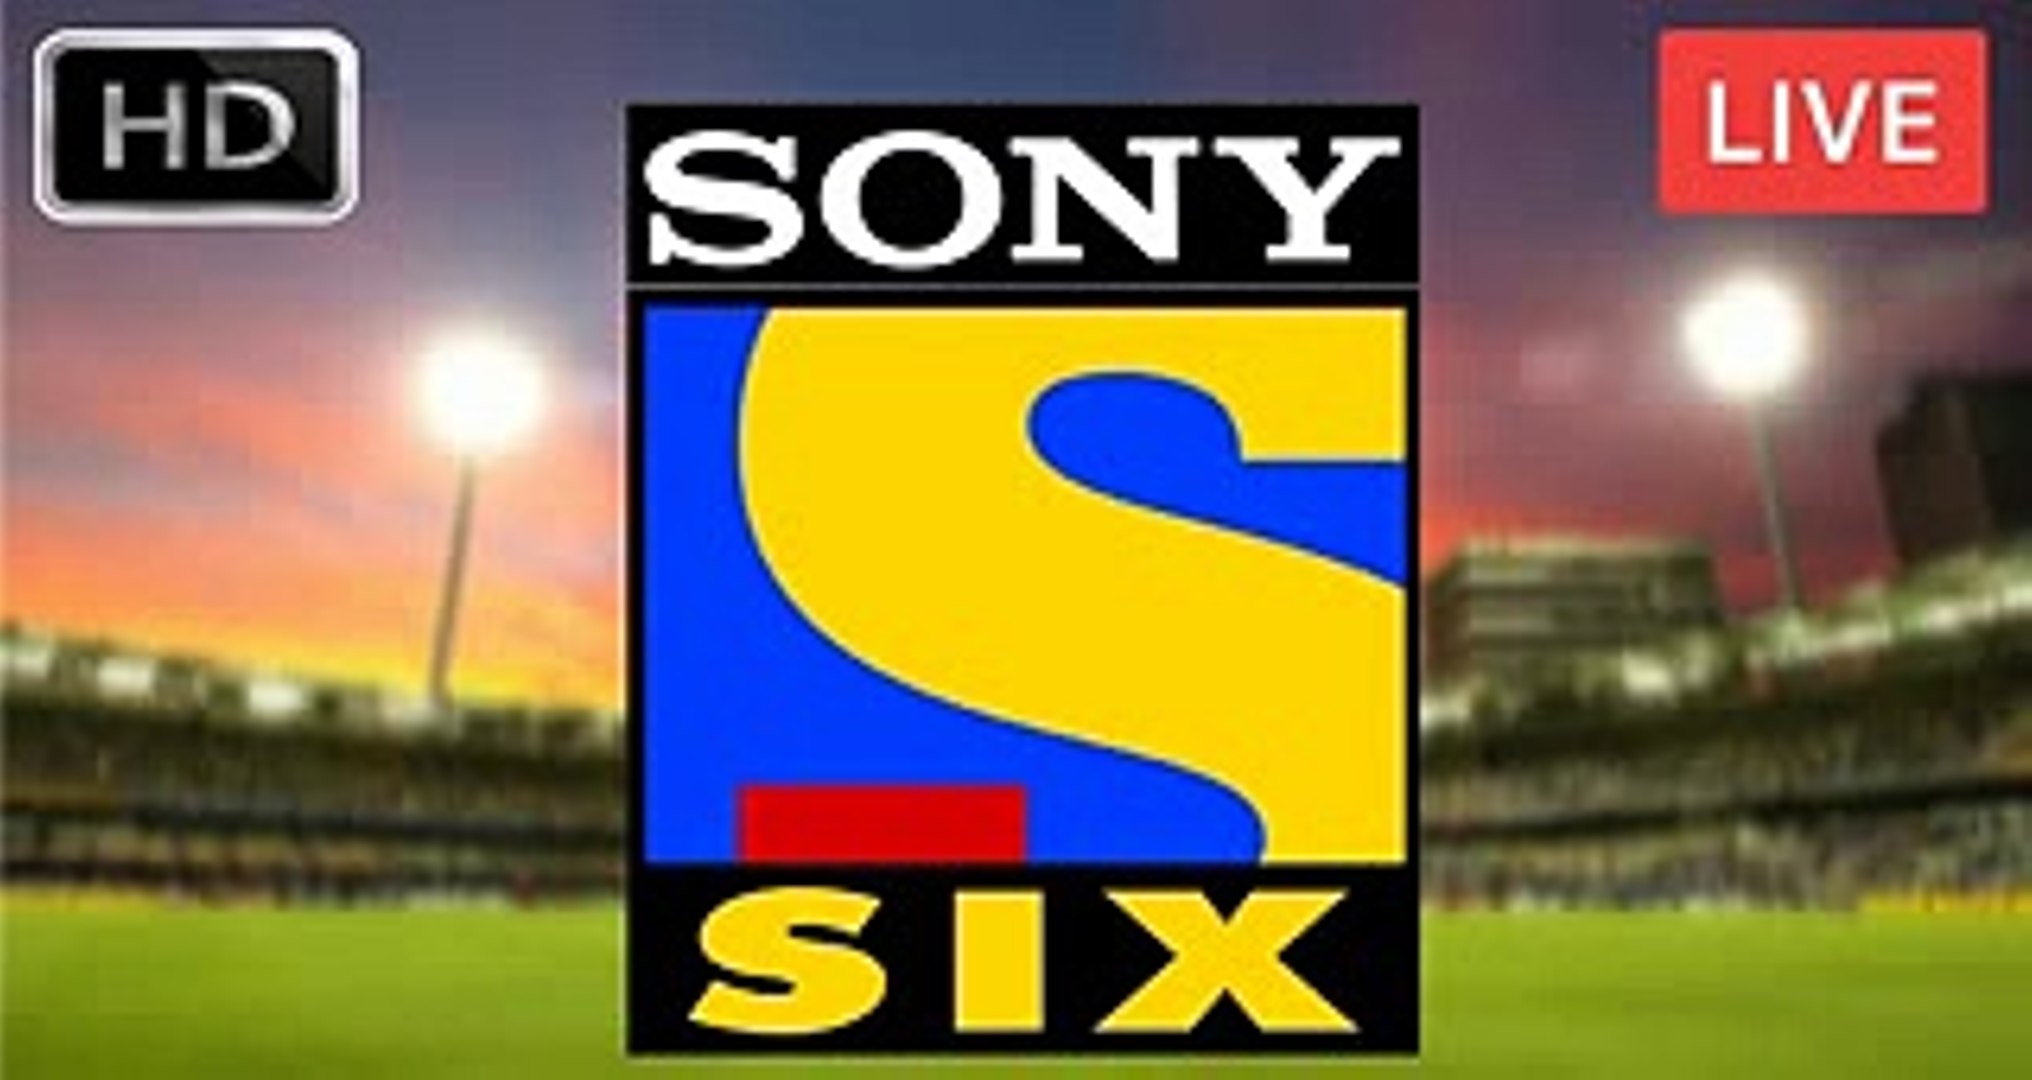 Sony Ten 3 live cricket streaming India vs Australia 1st Test with highlights